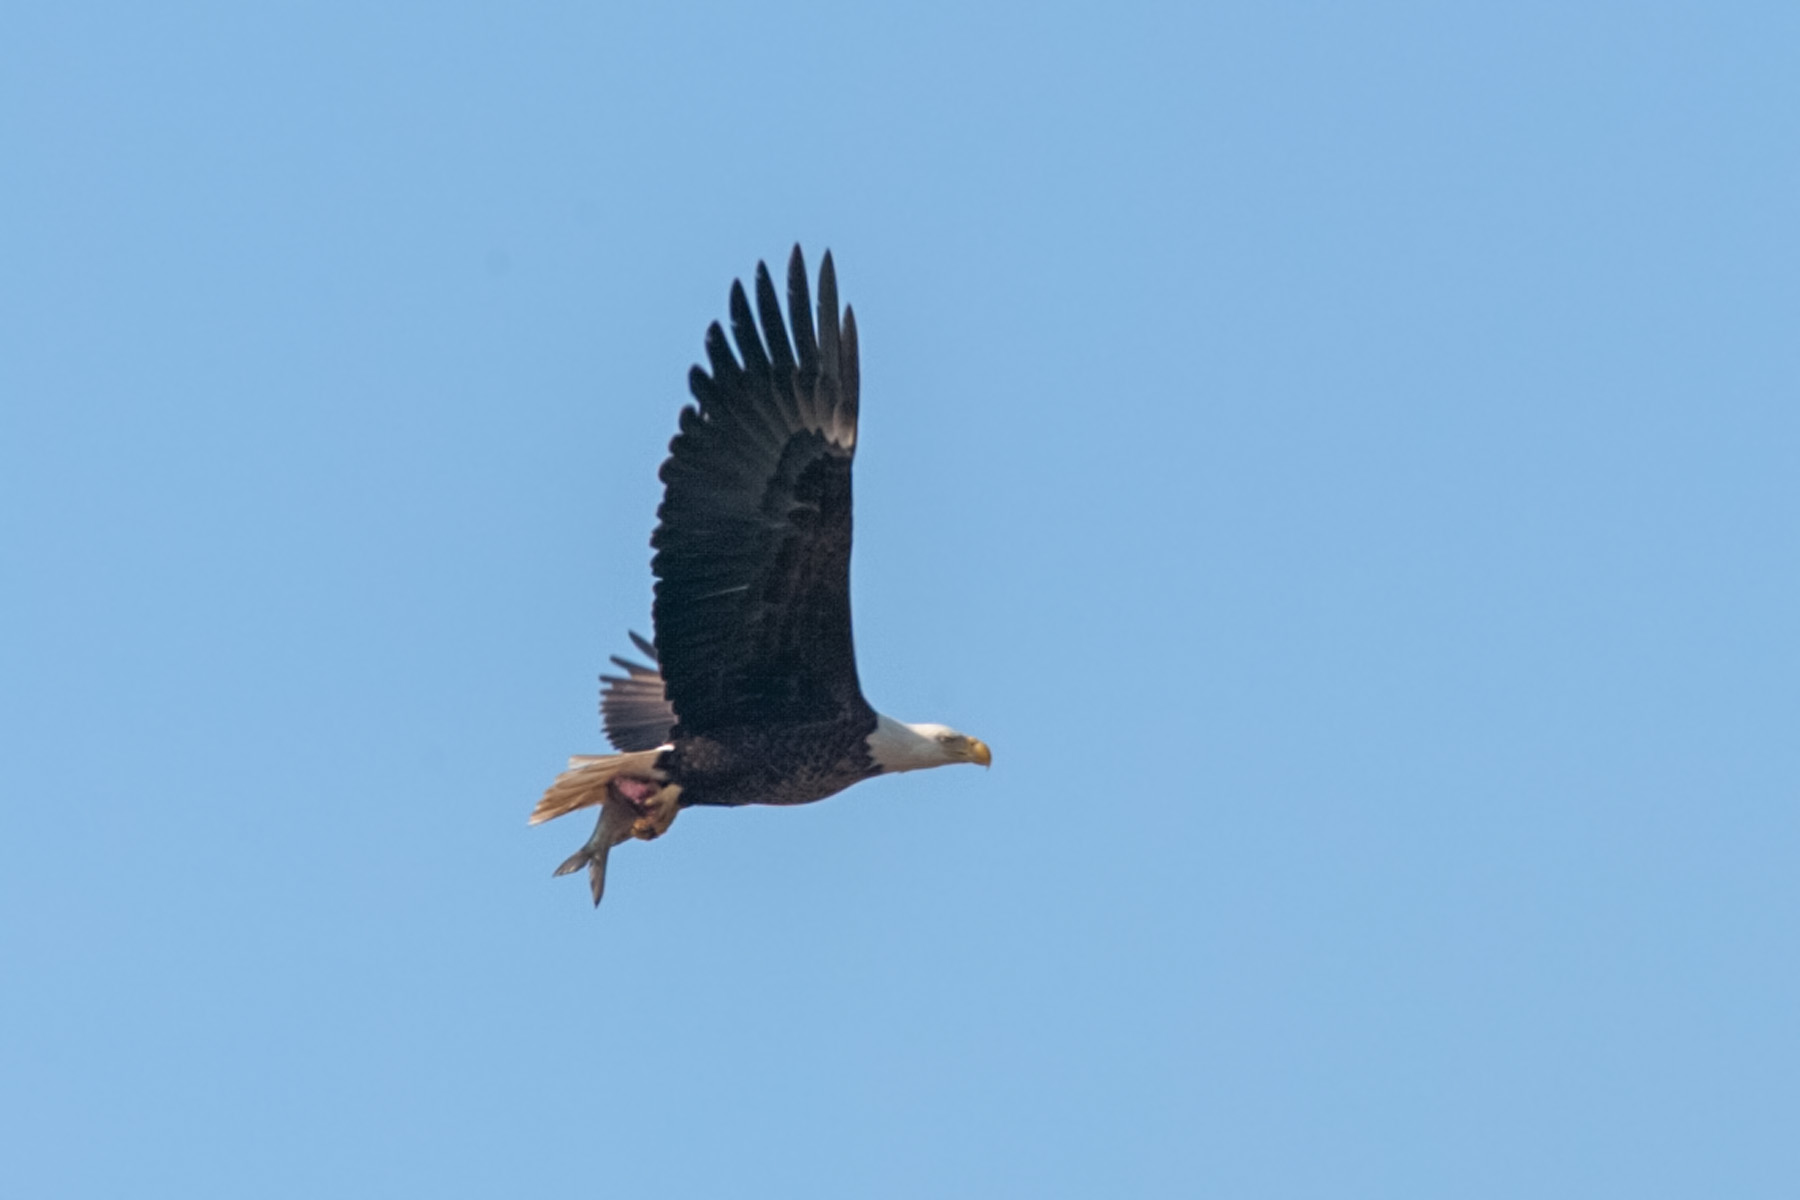 Eagle with a fish at Eastern Neck National Wildlife Refuge near Rock Hall, Maryland.  Not a sharp image, but this was one of my first eagle sightings in flight with a fish and I was happy to get it.  Click for next photo.